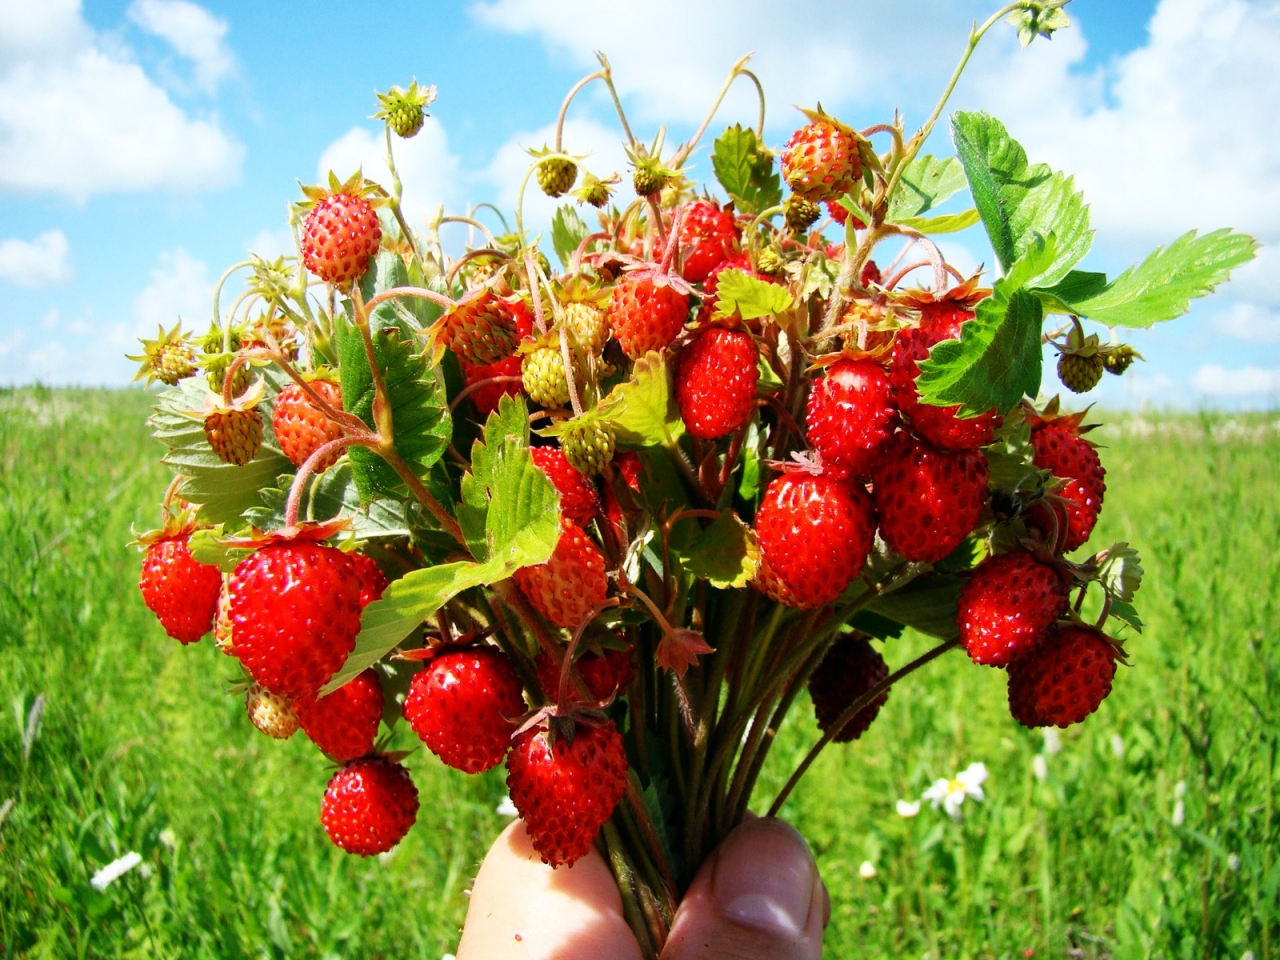 Bouquet of wild strawberries for 1280 x 960 resolution